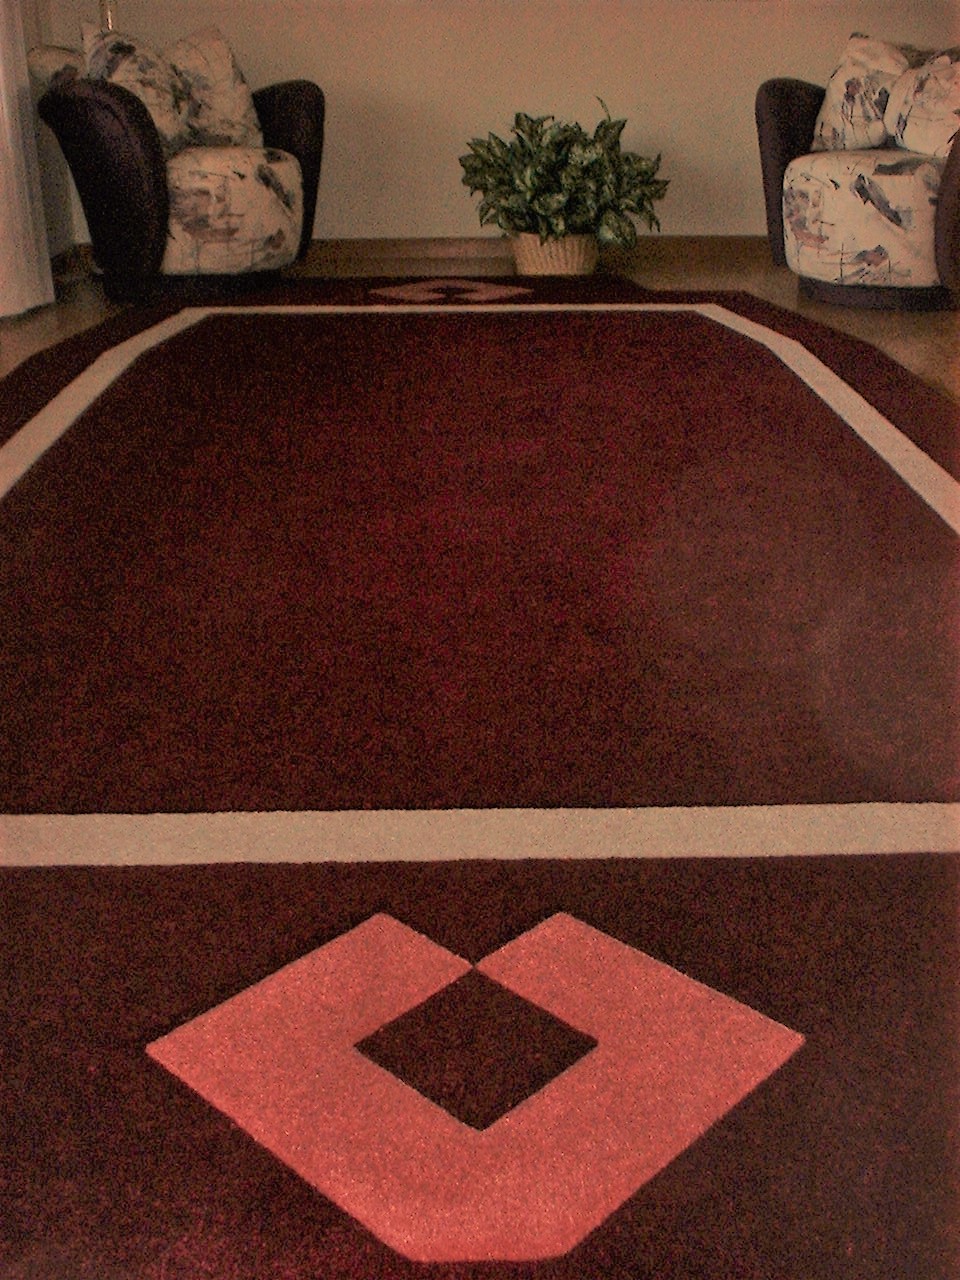 Geometric patterns work in many spaces and with various styles of furniture, as evidenced by this custom area rug.